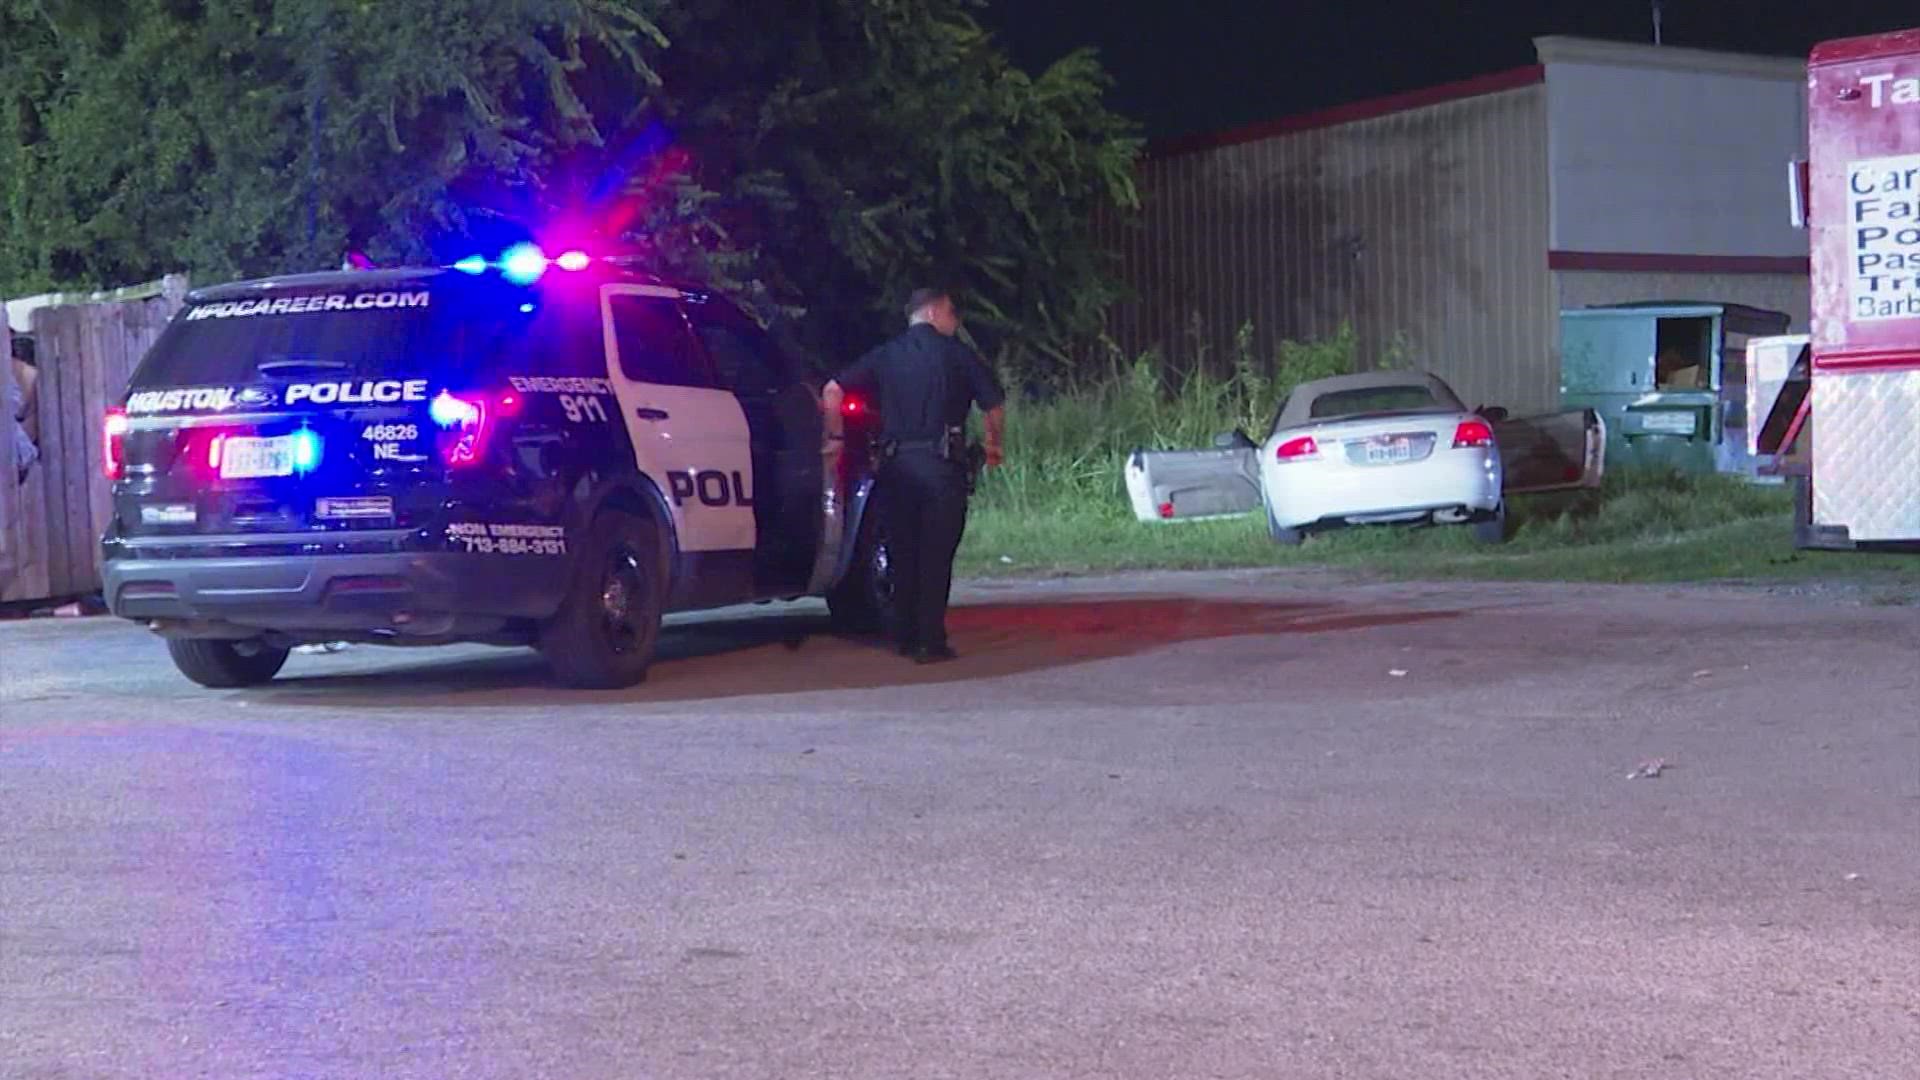 The suspects crashed on Jensen Drive & East Crosstimbers Street and were then taken into custody